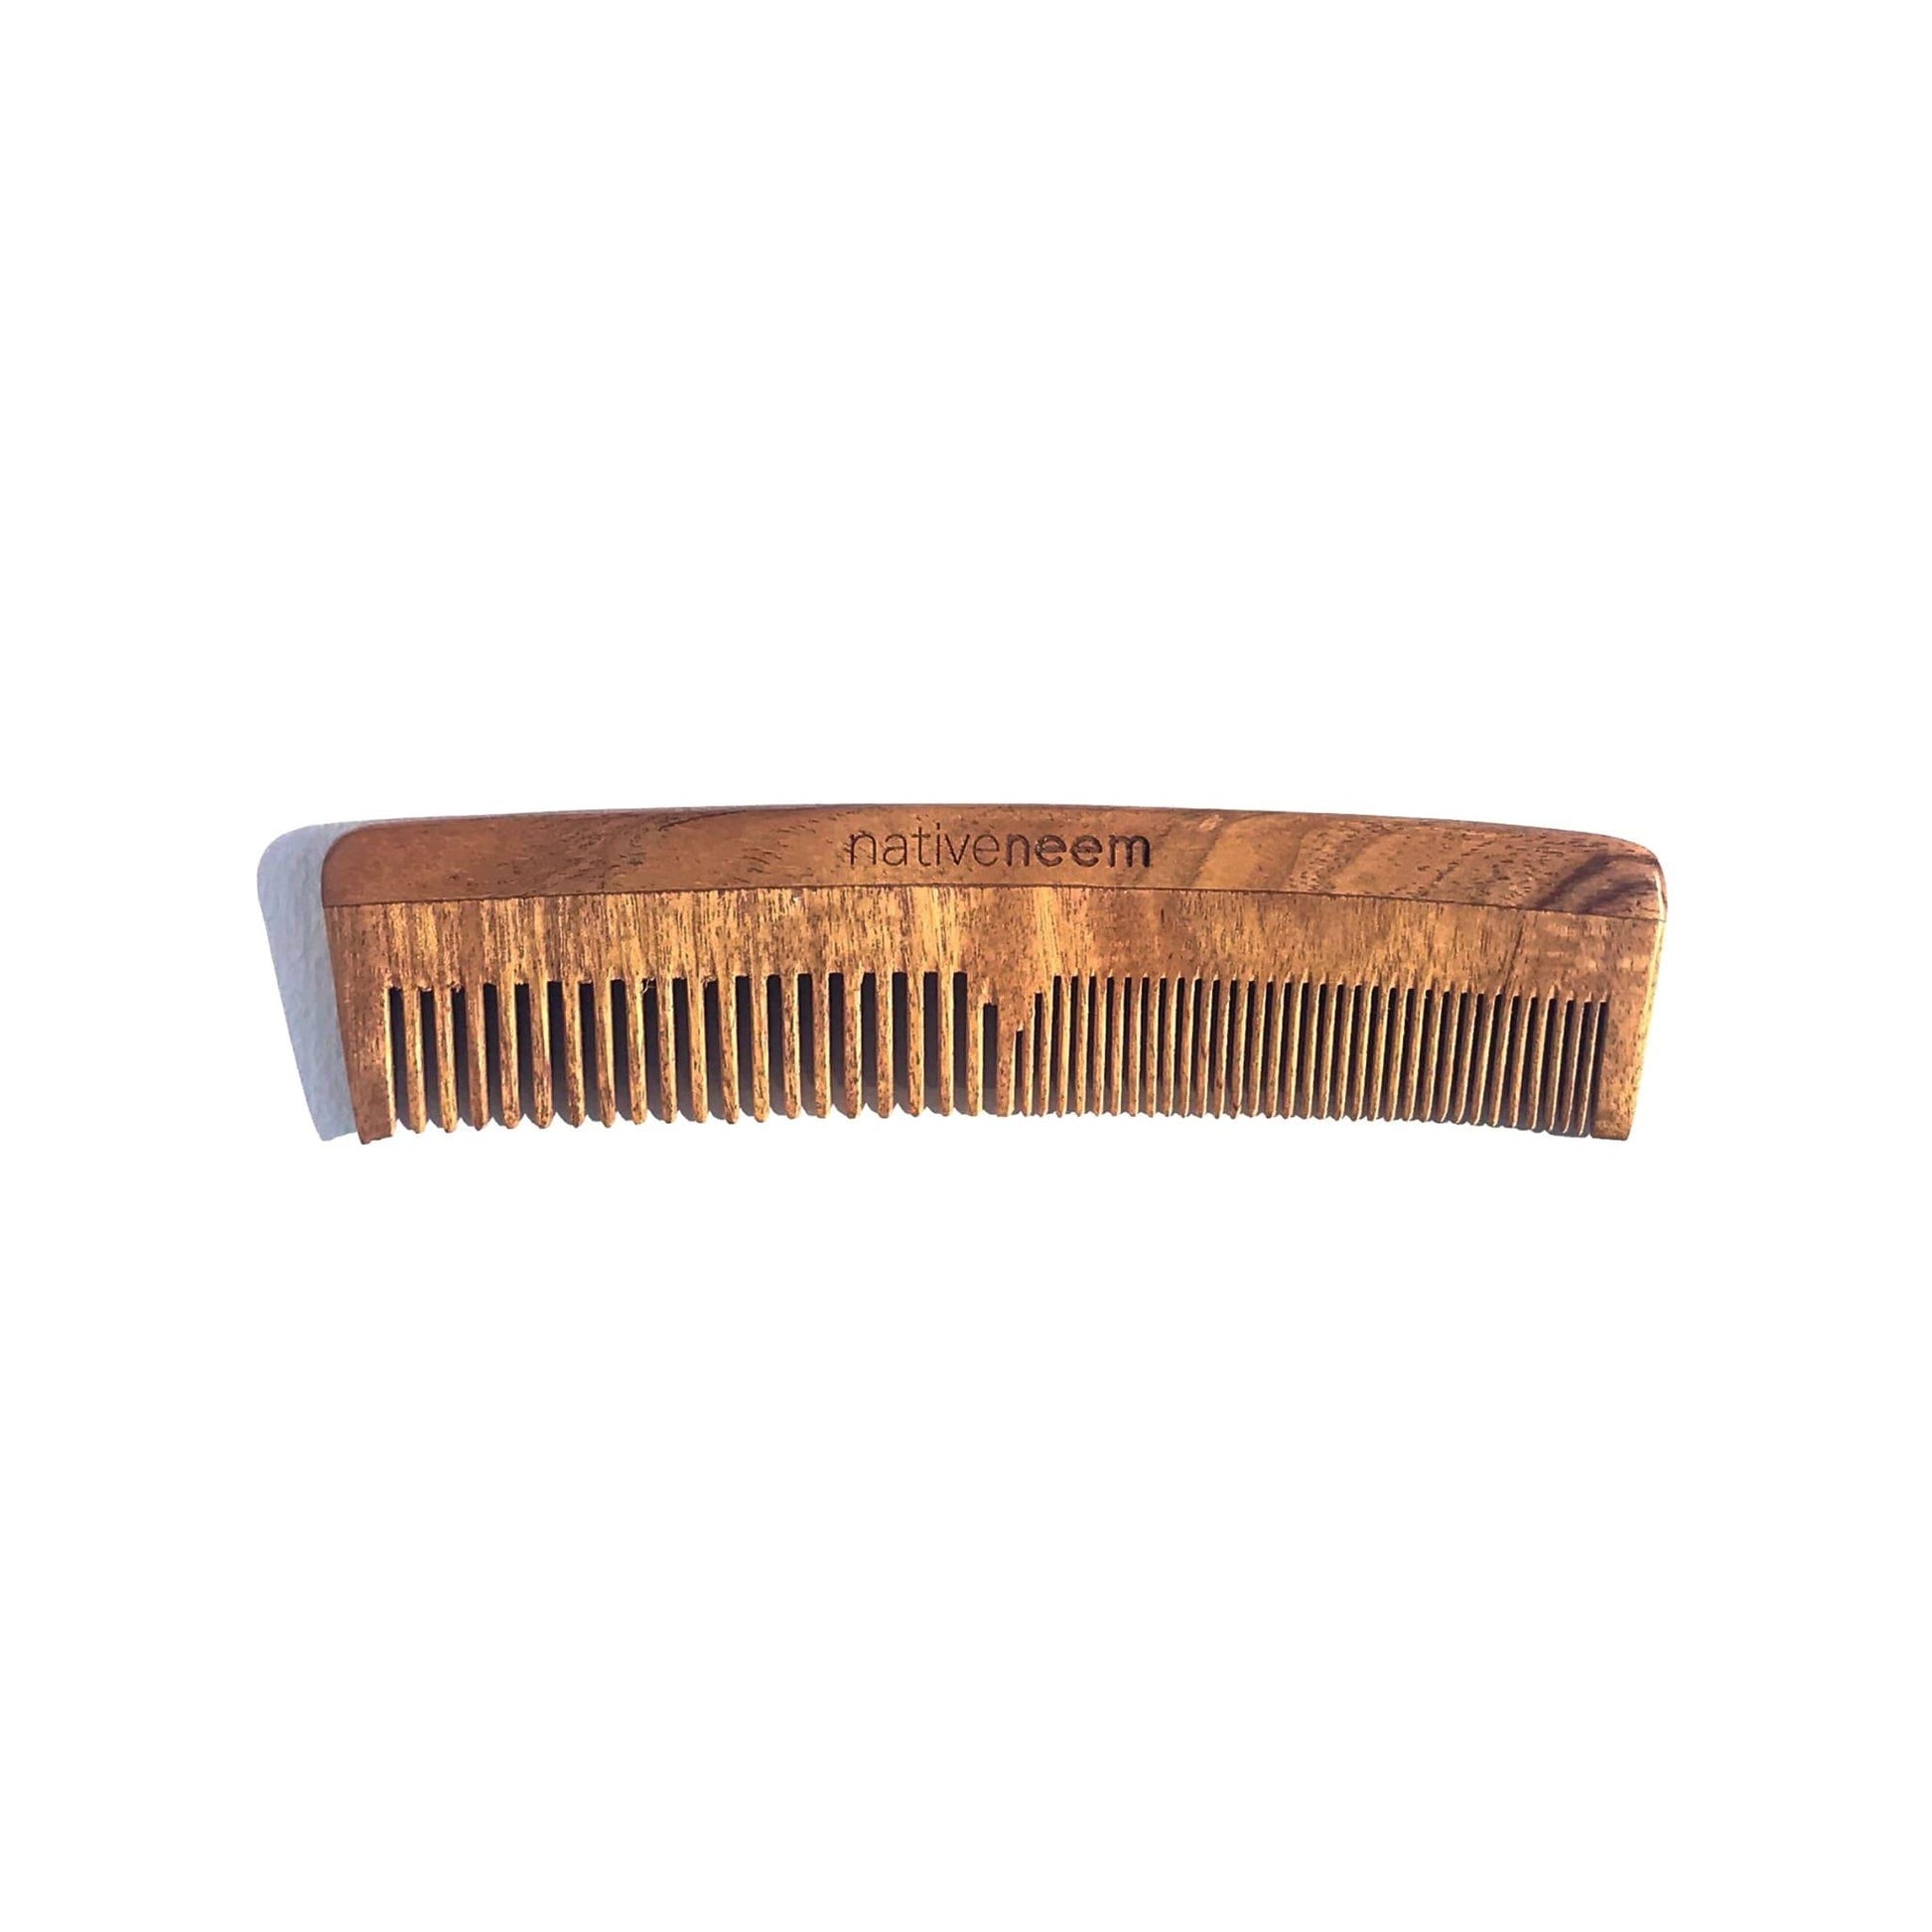 Wooden Neem Comb Wide Tooth - Green Trading